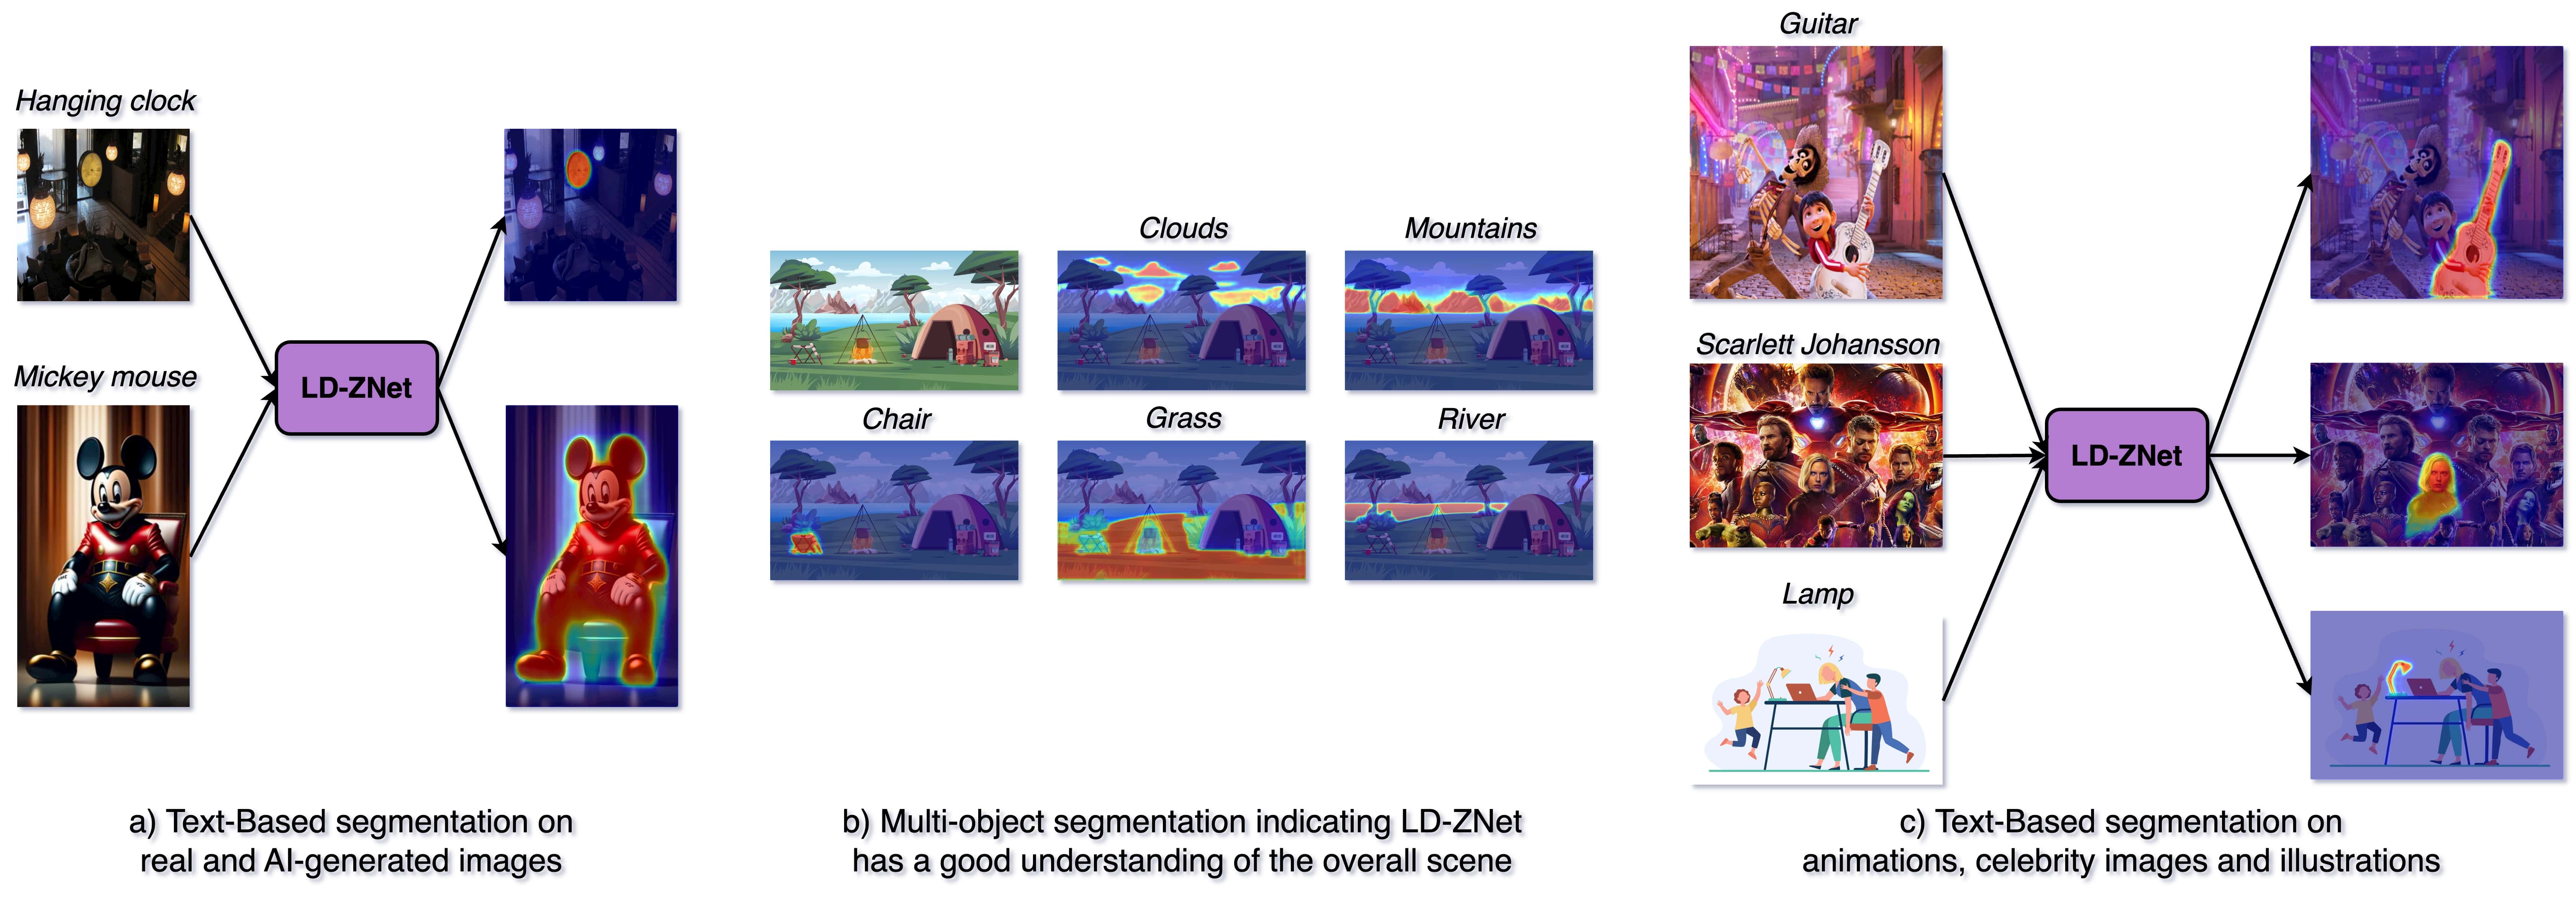 LD-ZNet can segment various objects on real and AI-generated images